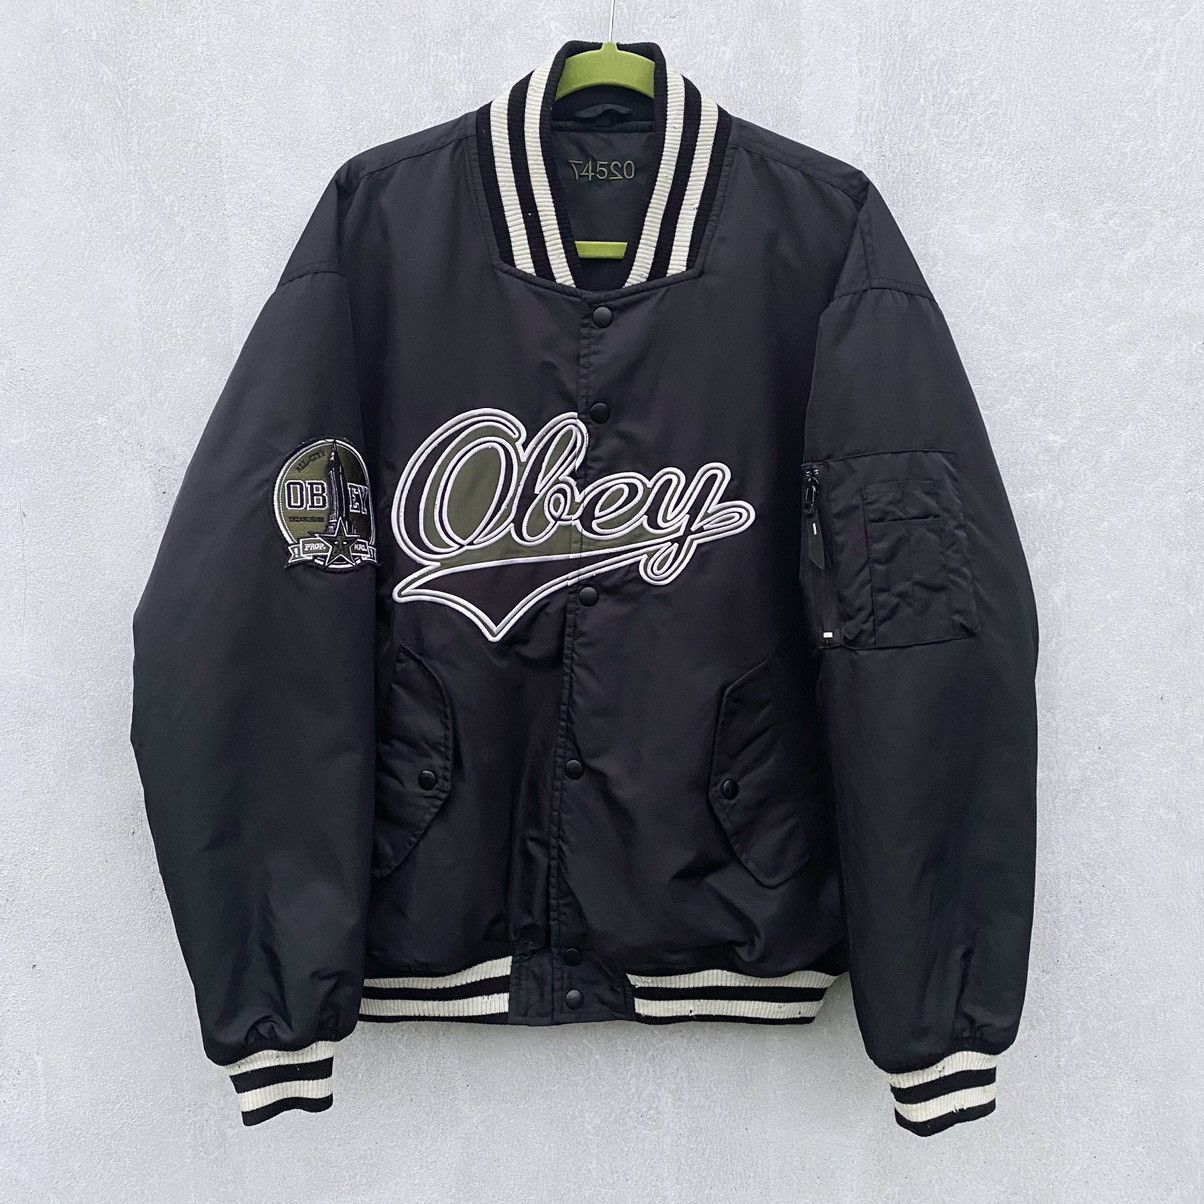 Obey Obey Spellout Bomber Jacket | Grailed